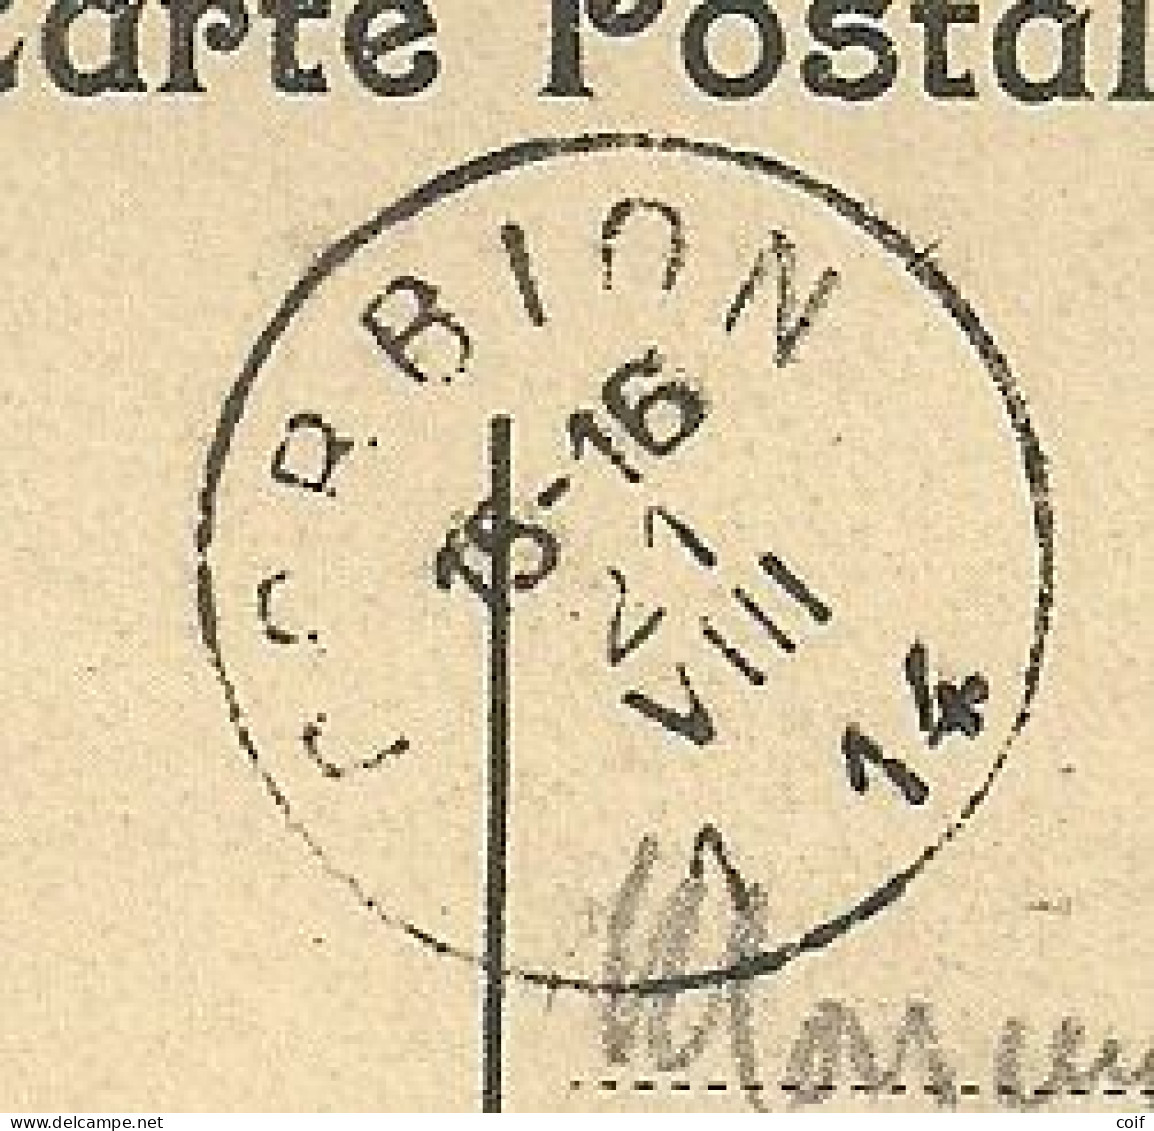 Kaart Stempel CORBION Op 21/08/1914 (Offensief W.O.I) - Zone Non Occupée